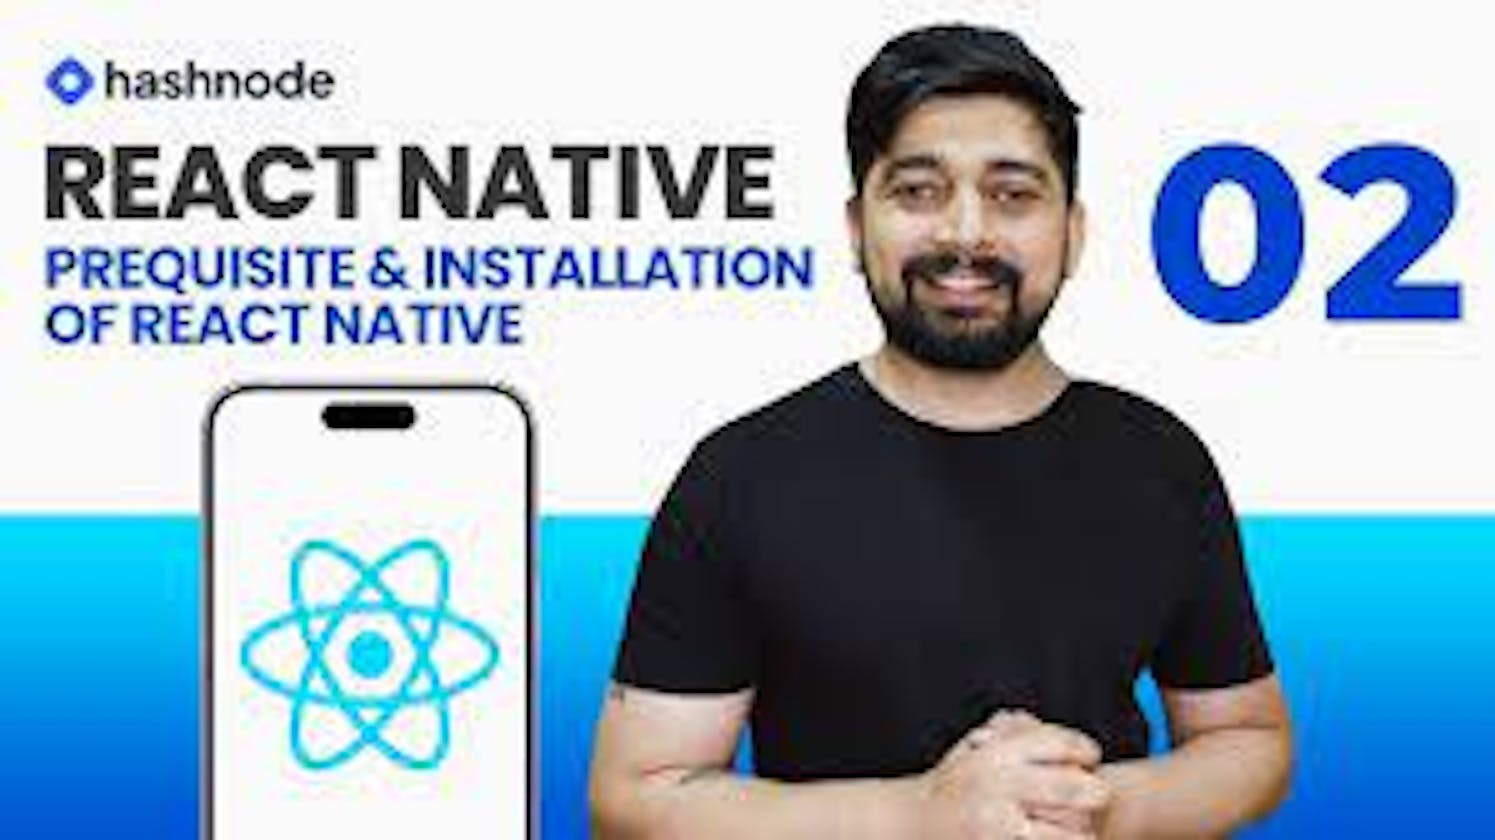 #2 React Native Course by Hitesh Chaudhary ( Each Video Summary by me just for practice and memorizing)